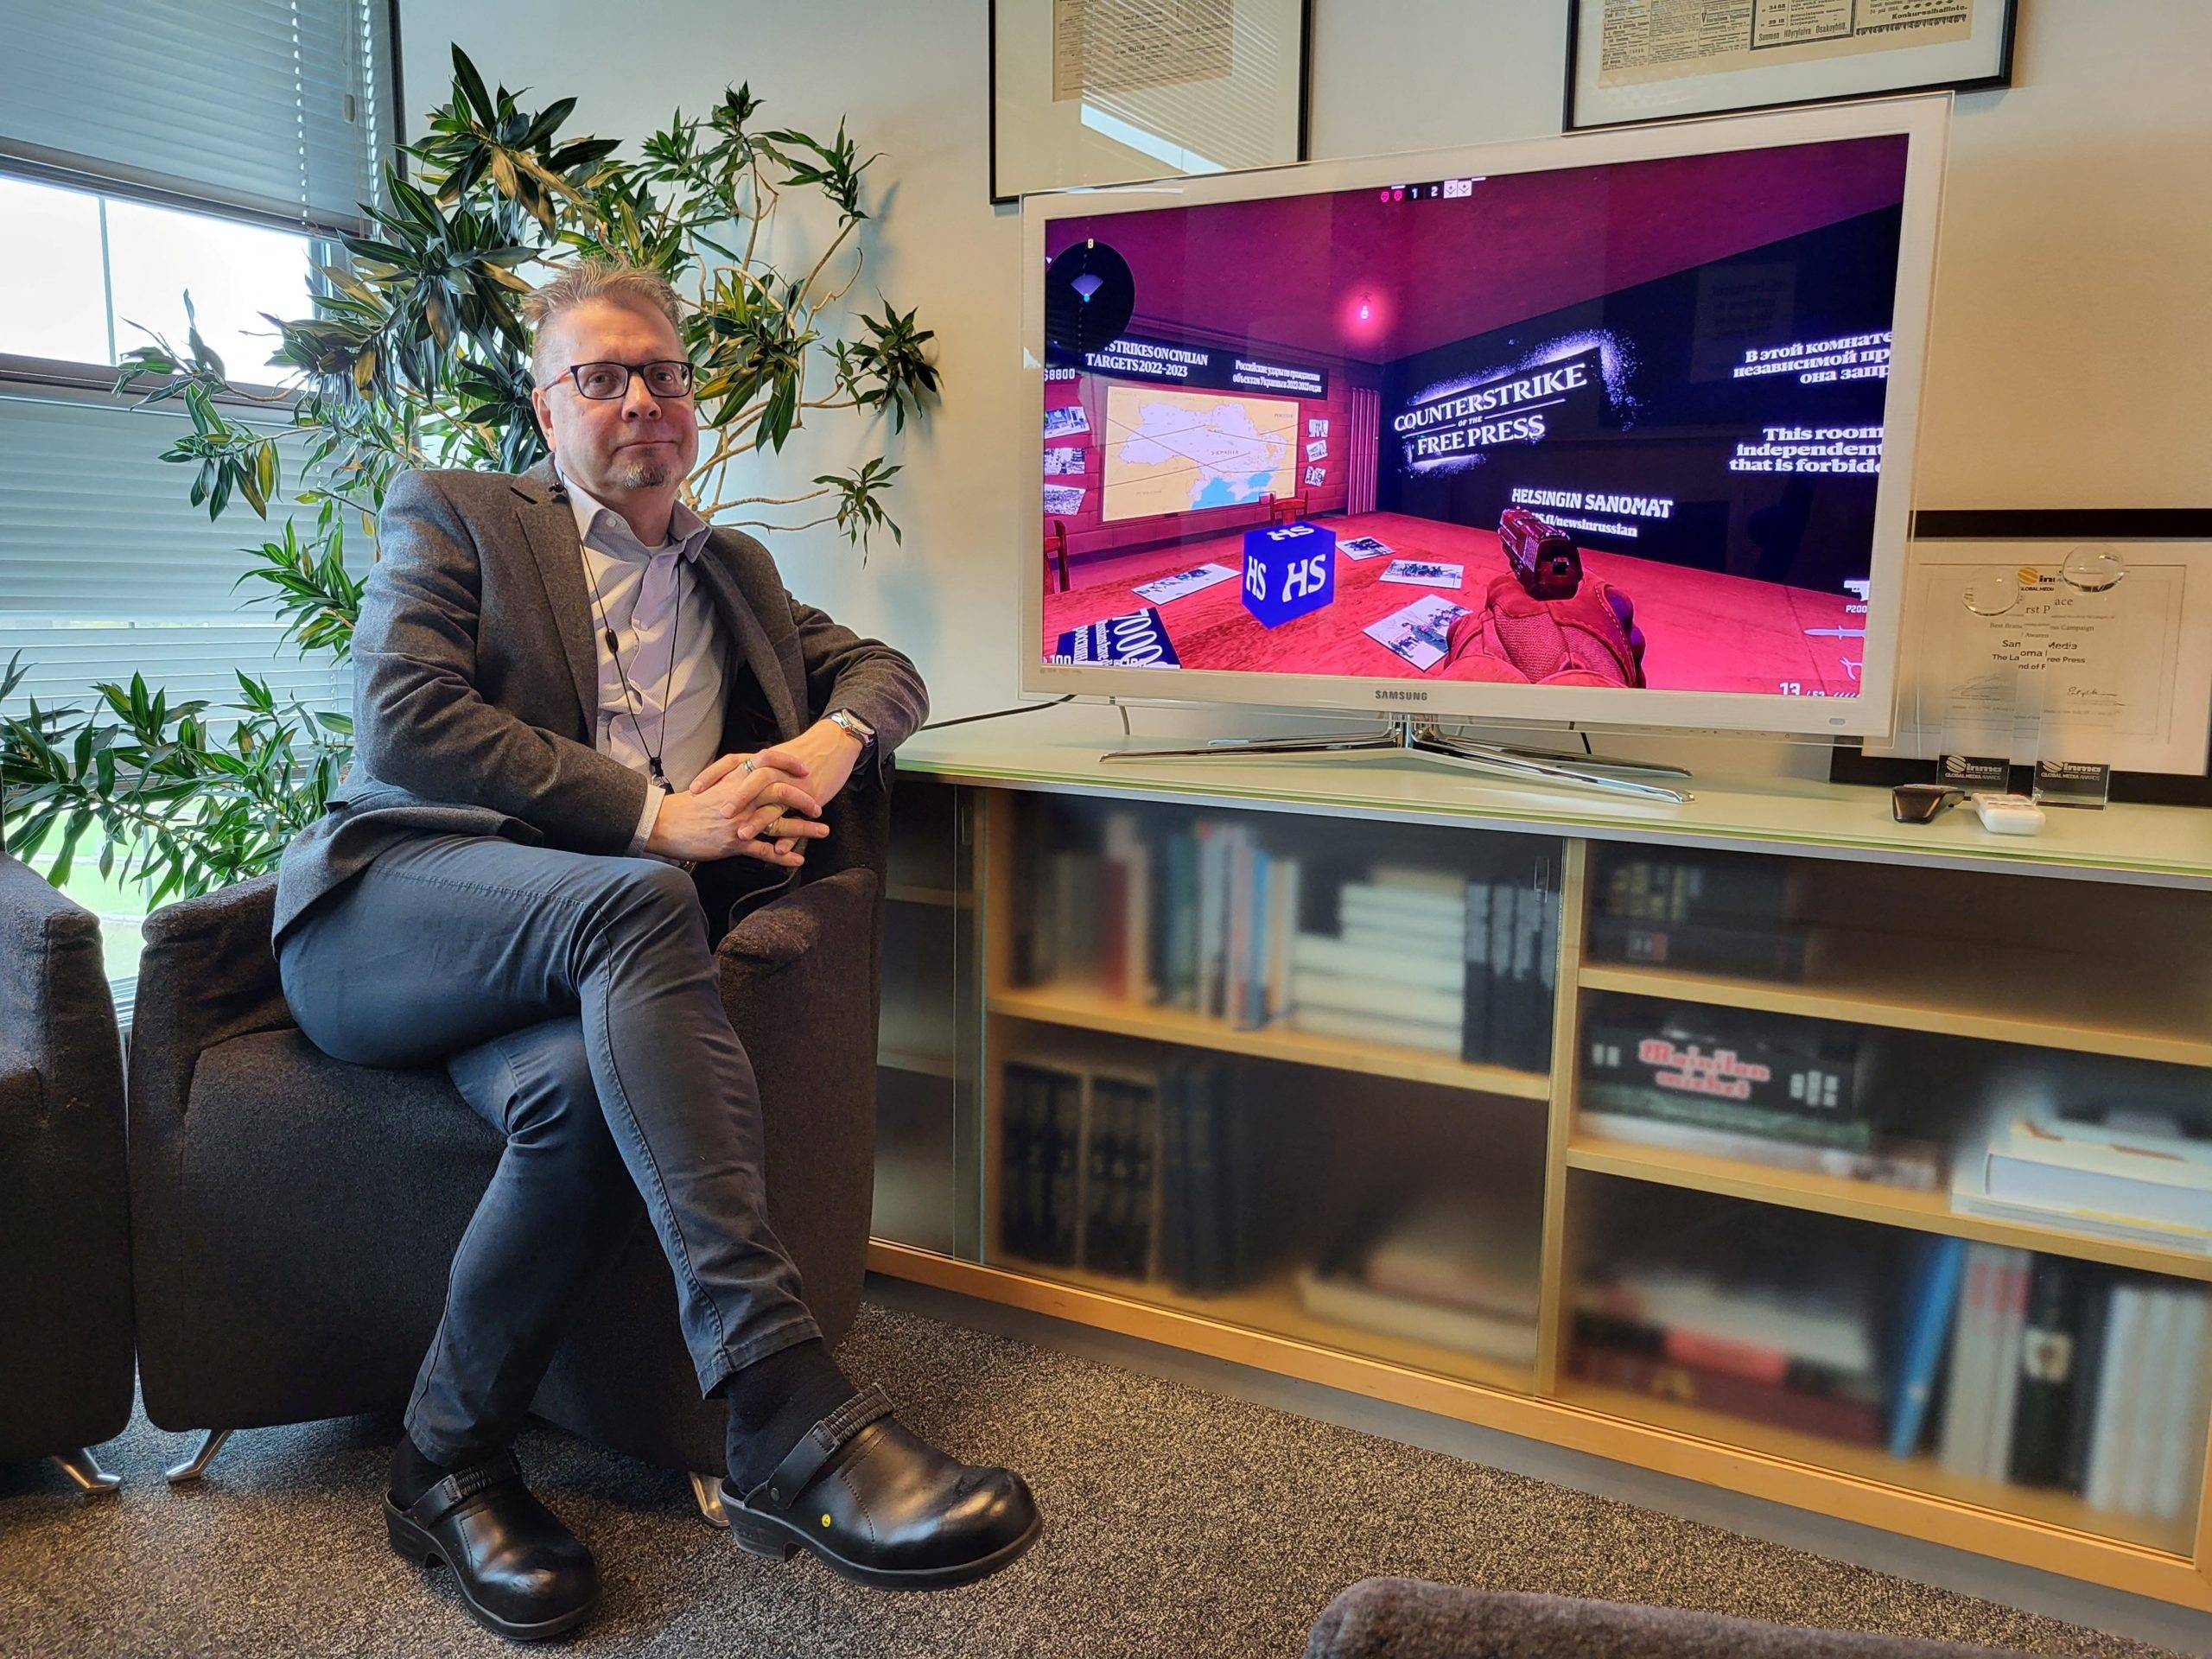 Helsingin Sanomat Editor-In-Chief Antero Mukka sitting close to the television showing the strategy released on the world press freedom day (Photo credit REUTERS Anne Kauranen)